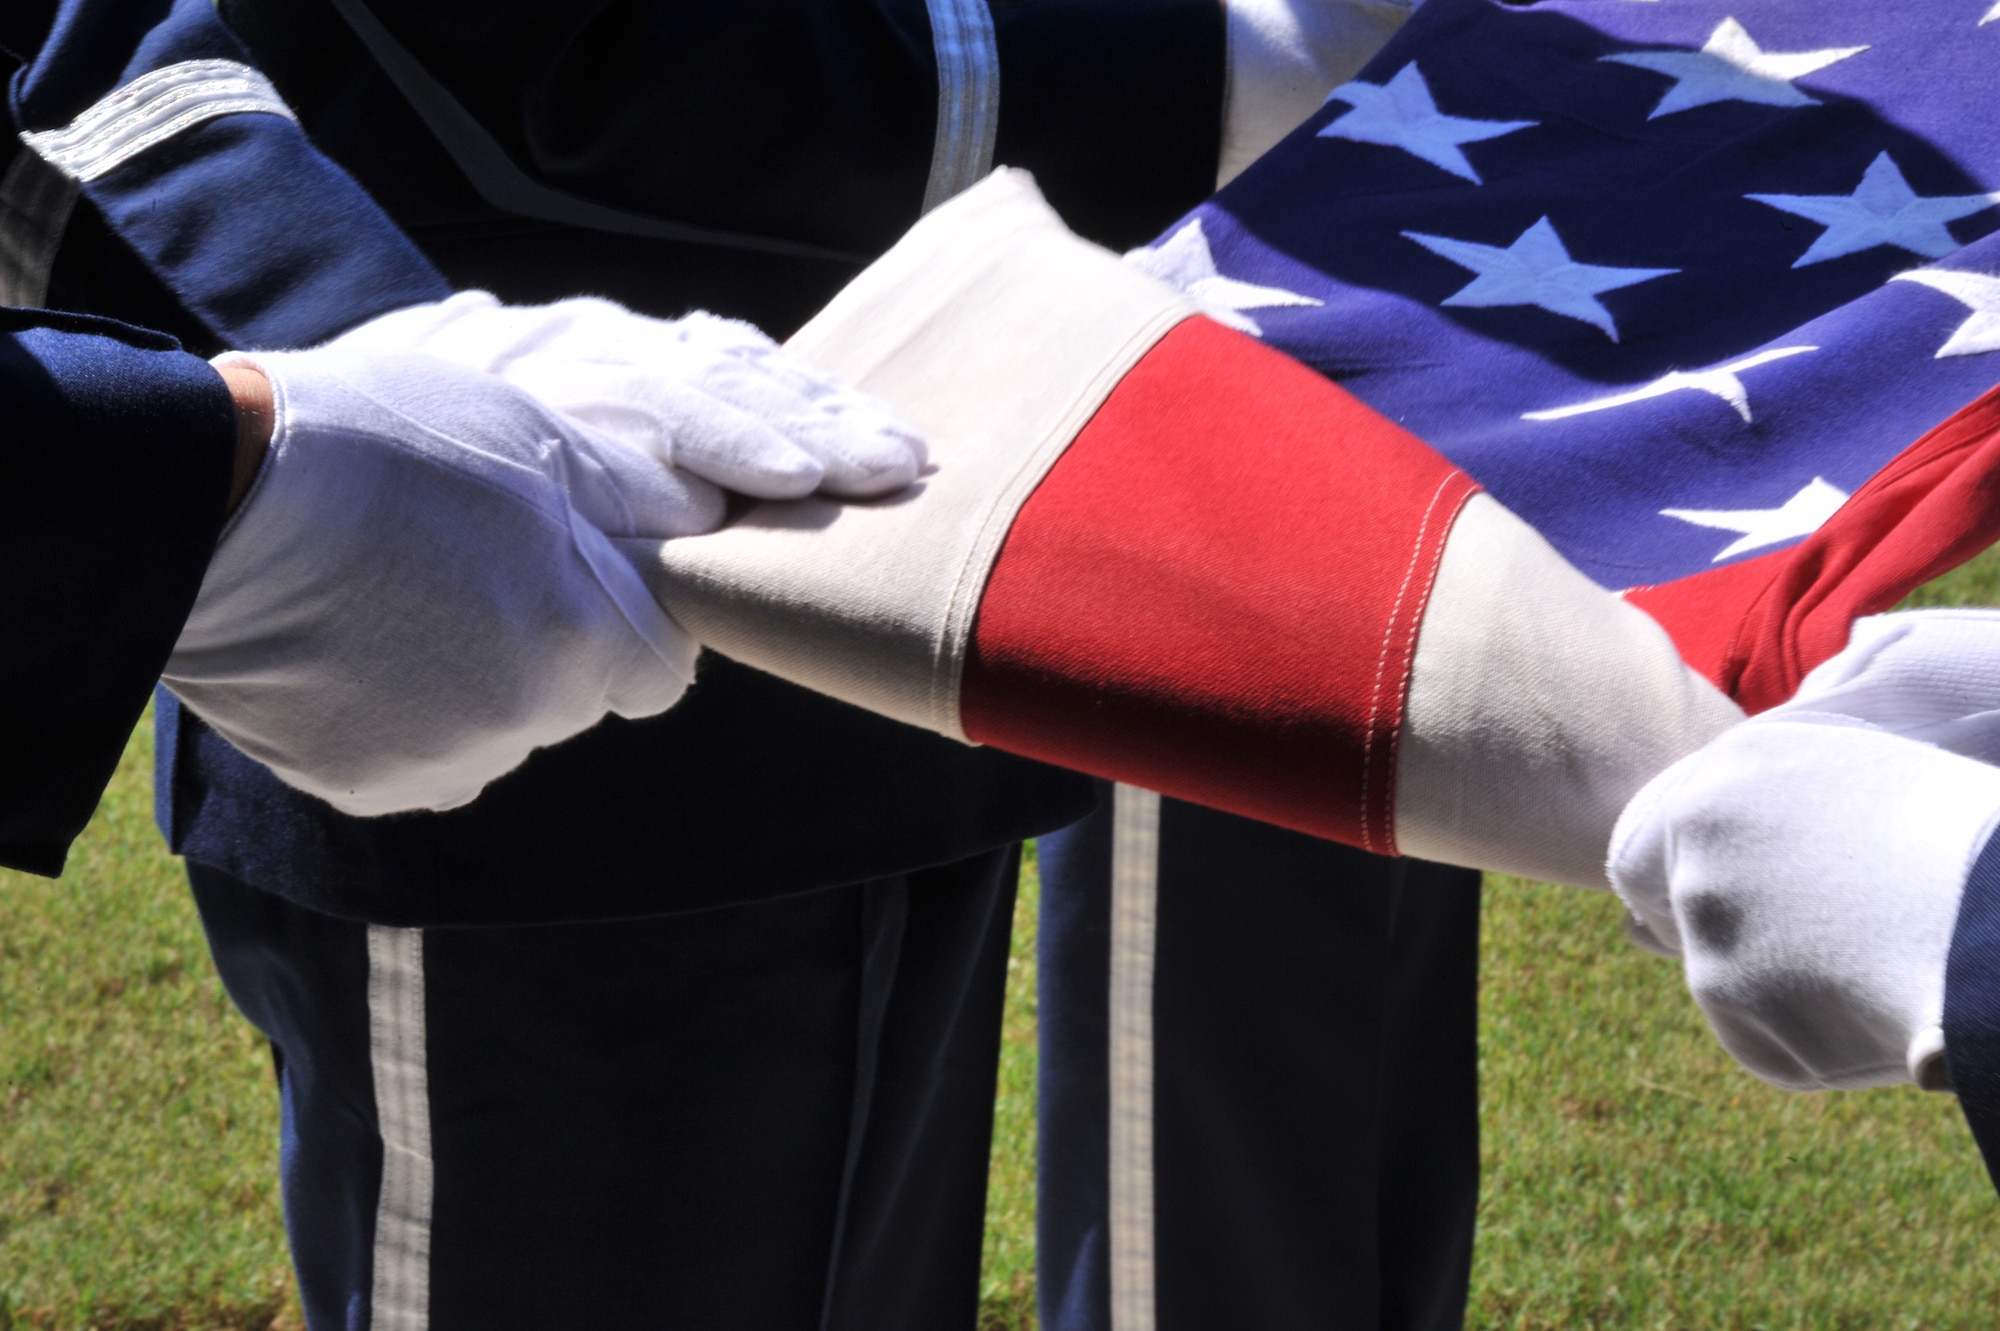 Airmen from Maxwell Air Force Base Honor Guard fold the American flag during a funeral at Alabama National Cemetery, August 22. The flag is presented to the next of kin to the deceased during the ceremony. (U.S. Air Force photo by Airman 1st Class William Blankenship)